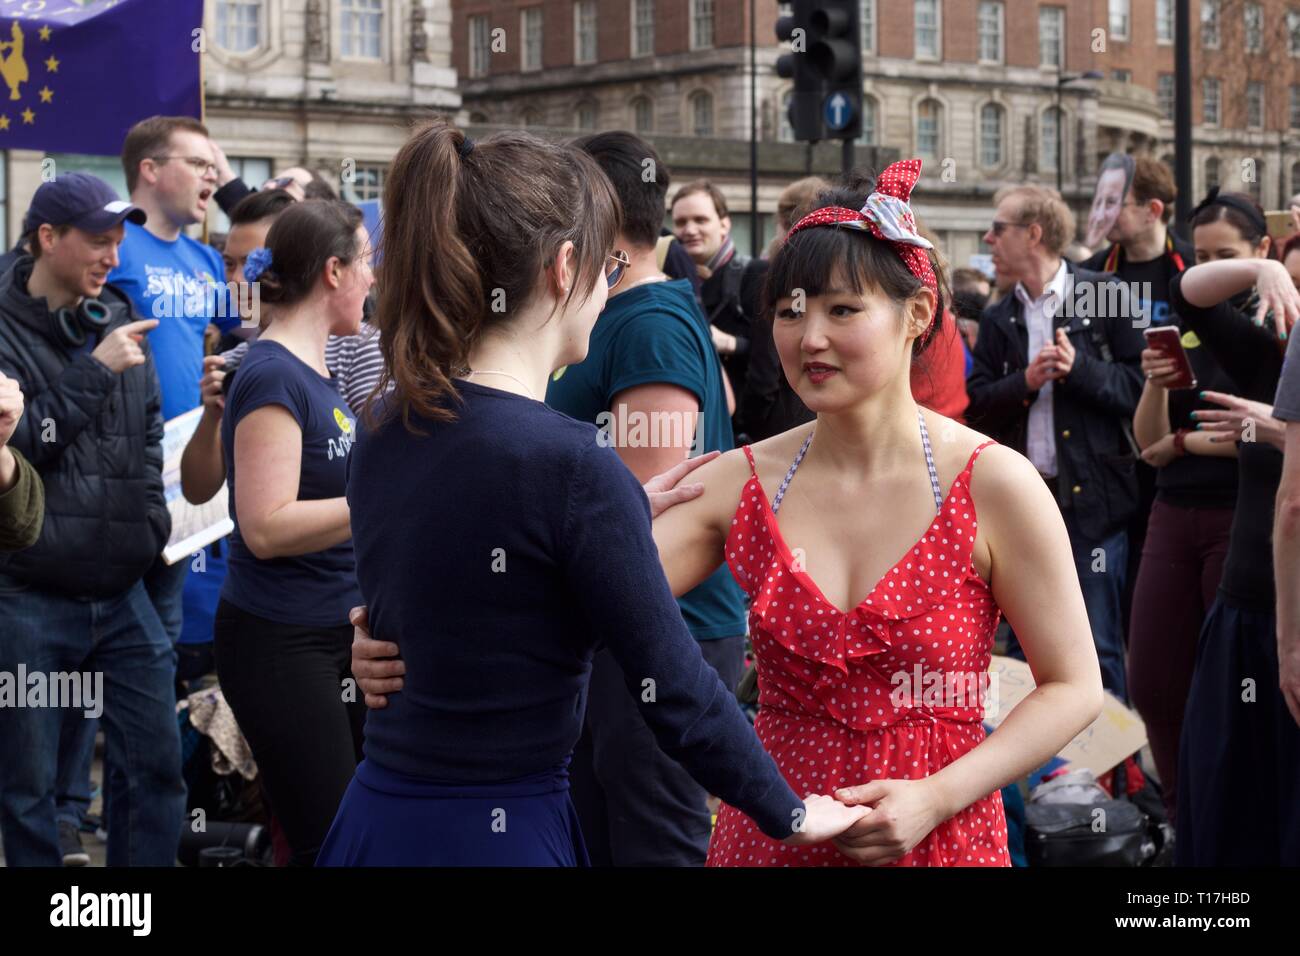 Girls dancing at the Revoke Article 50 Remain rally in London - Swing for Remain Stock Photo